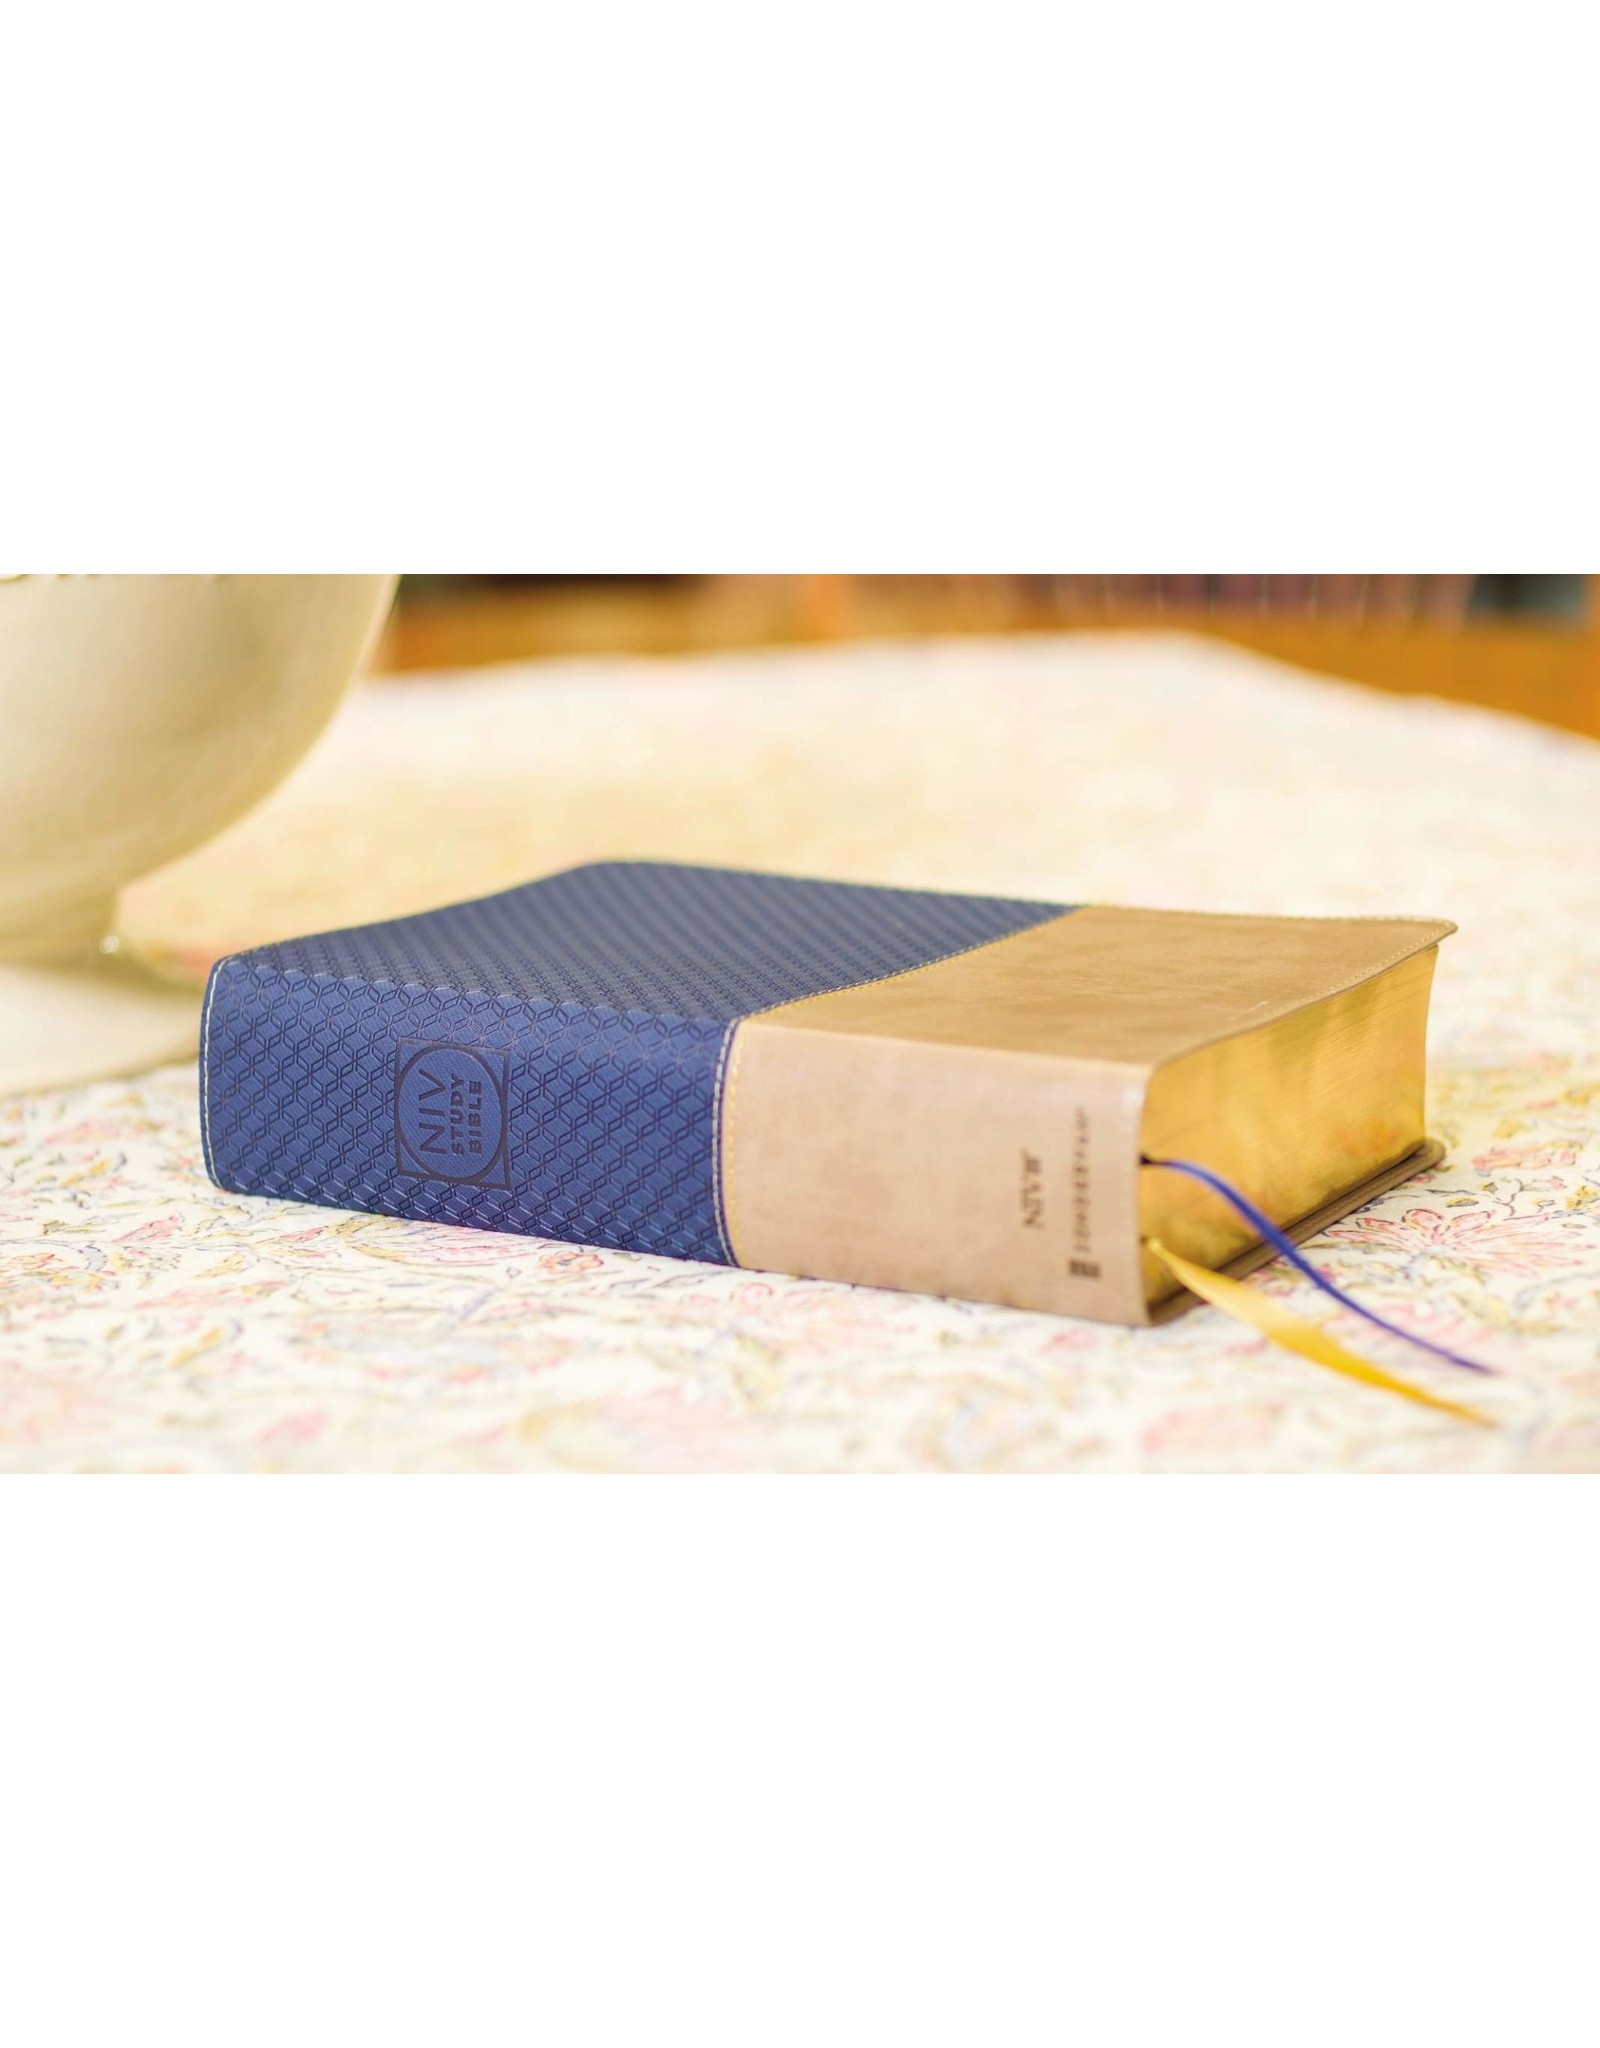 Zondervan NIV Study Bible, Leathersoft, Navy/Tan, Red Letter, Thumb Indexed, Comfort Print